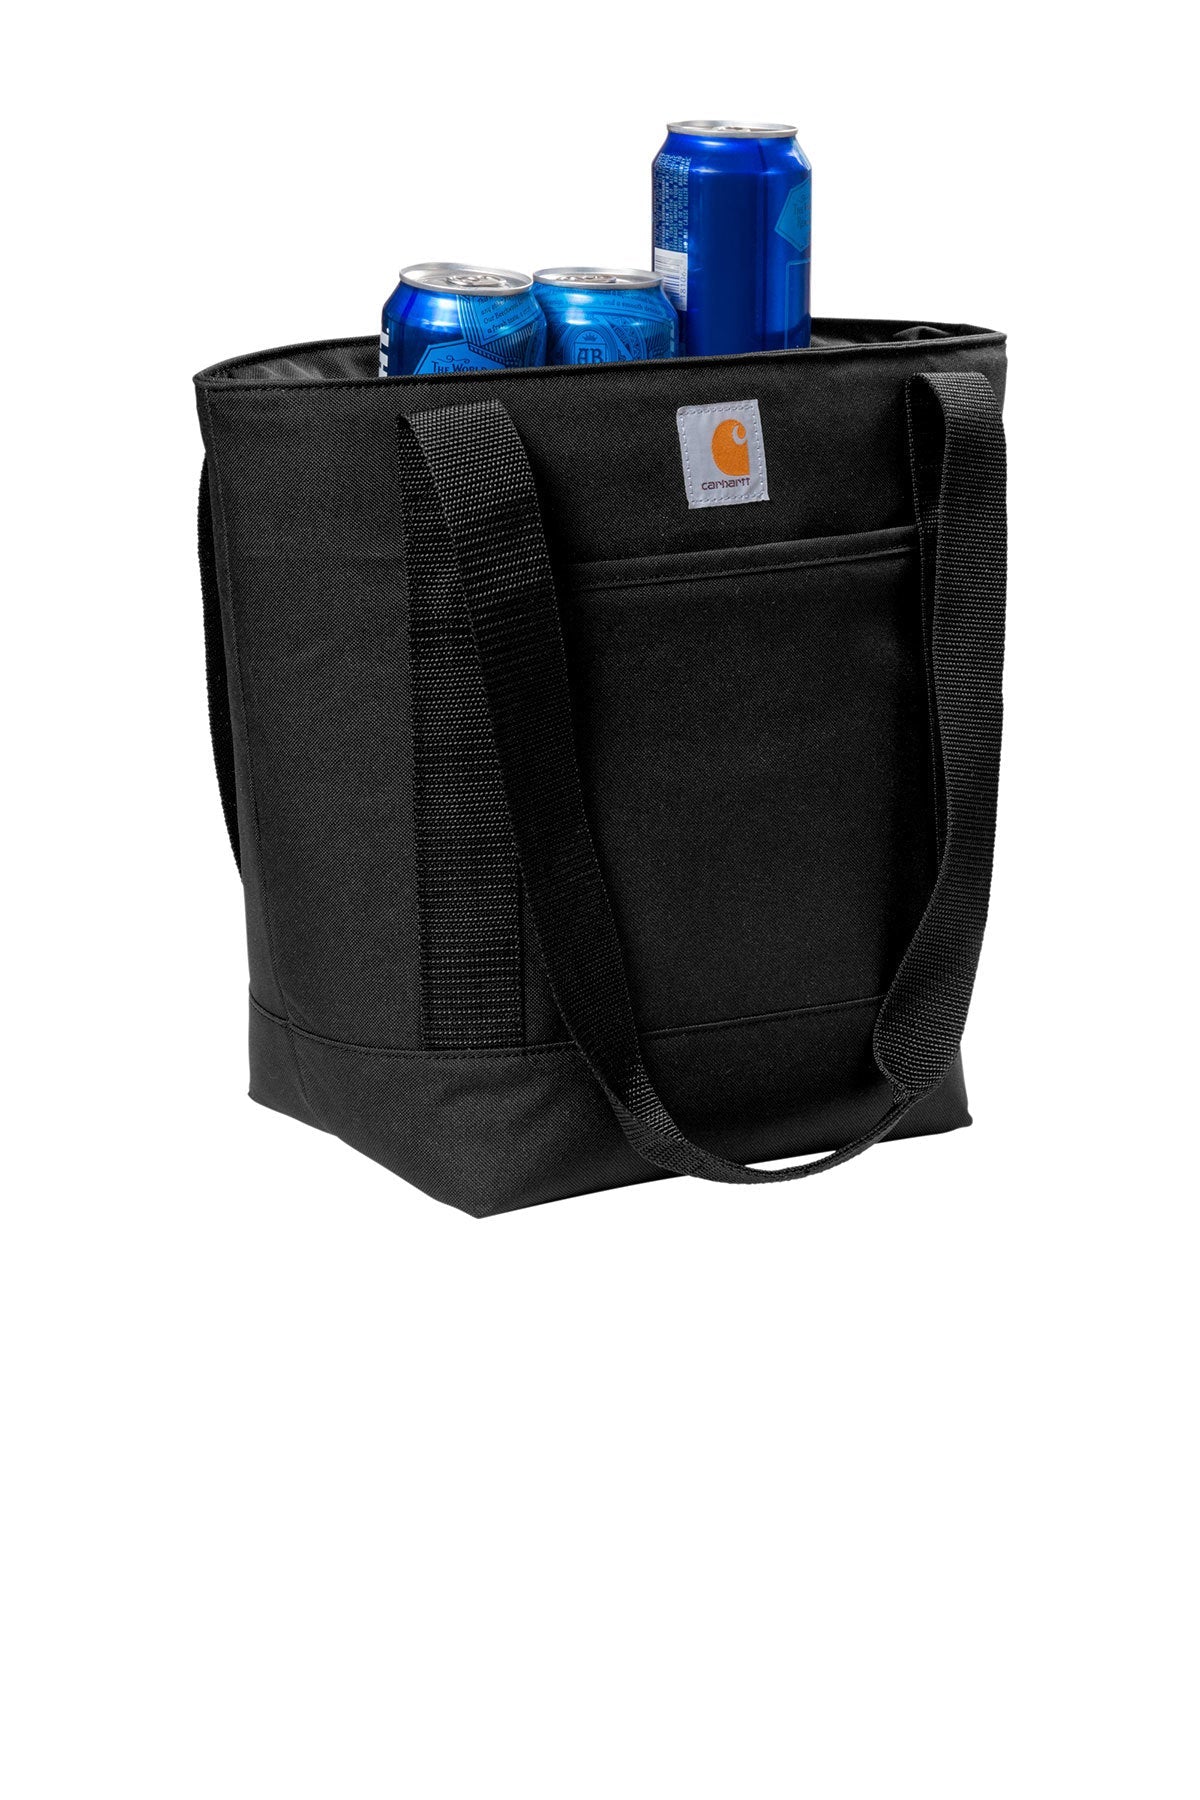 Carhartt® - Tote 18-Can Cooler - CT89101701